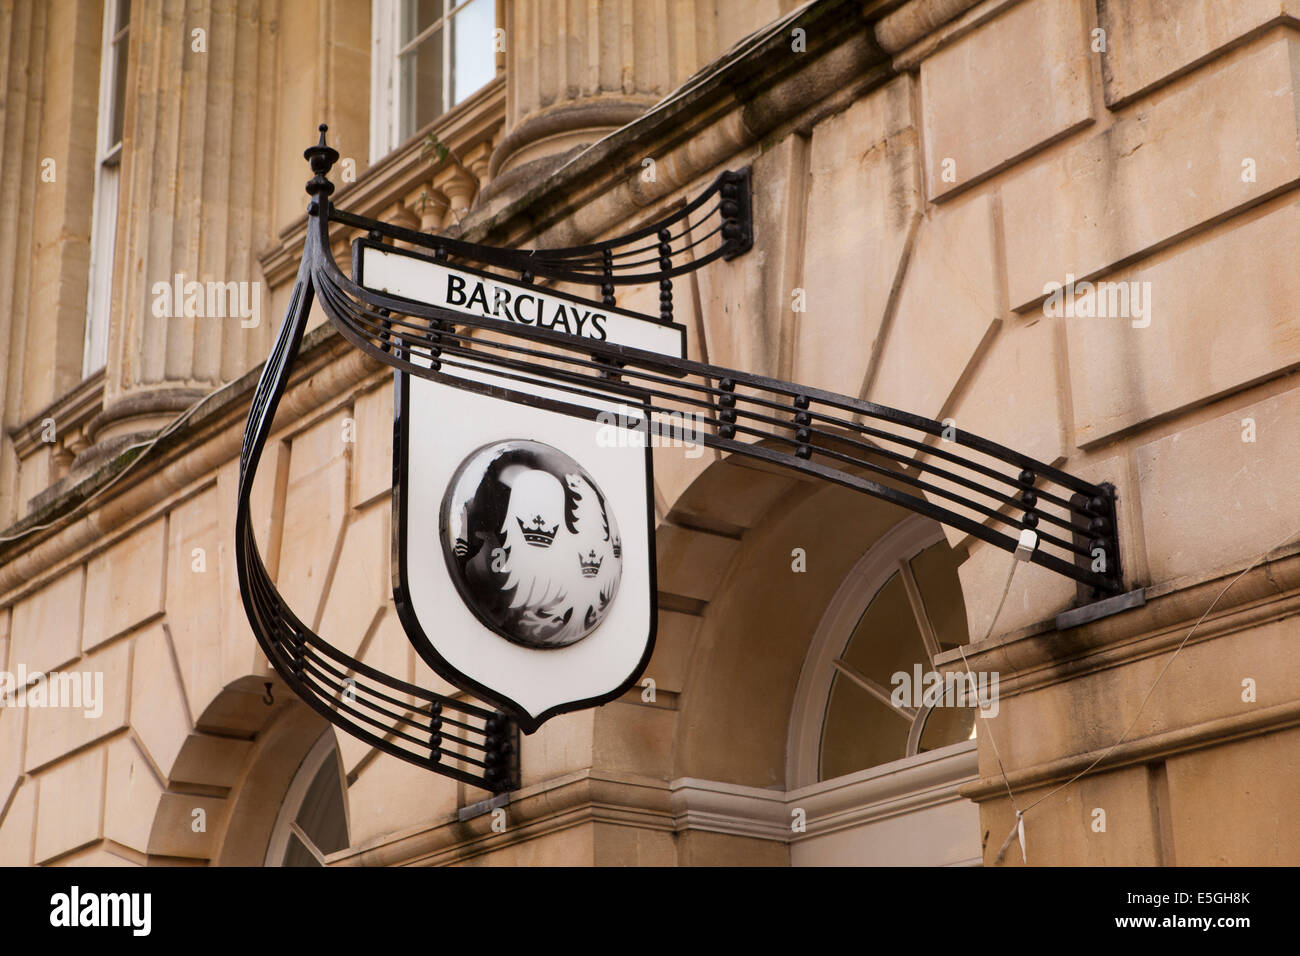 UK, England, Wiltshire, Bath, Milsom Street, Barclays Bank sign hung in elegant wrought iron support Stock Photo